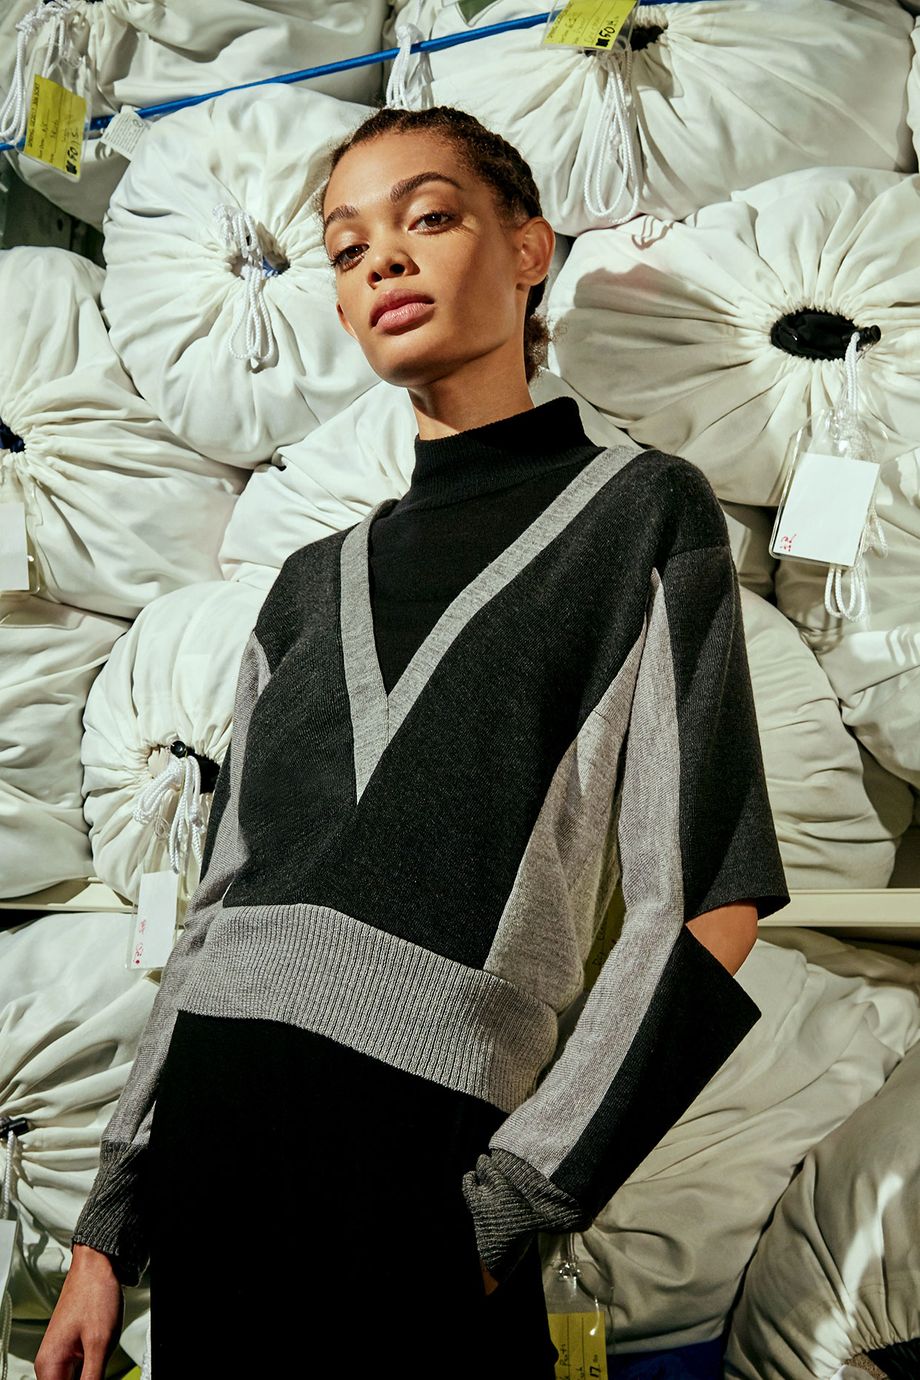 Eileen Fisher's Waste No More Brings Awareness to Sustainability